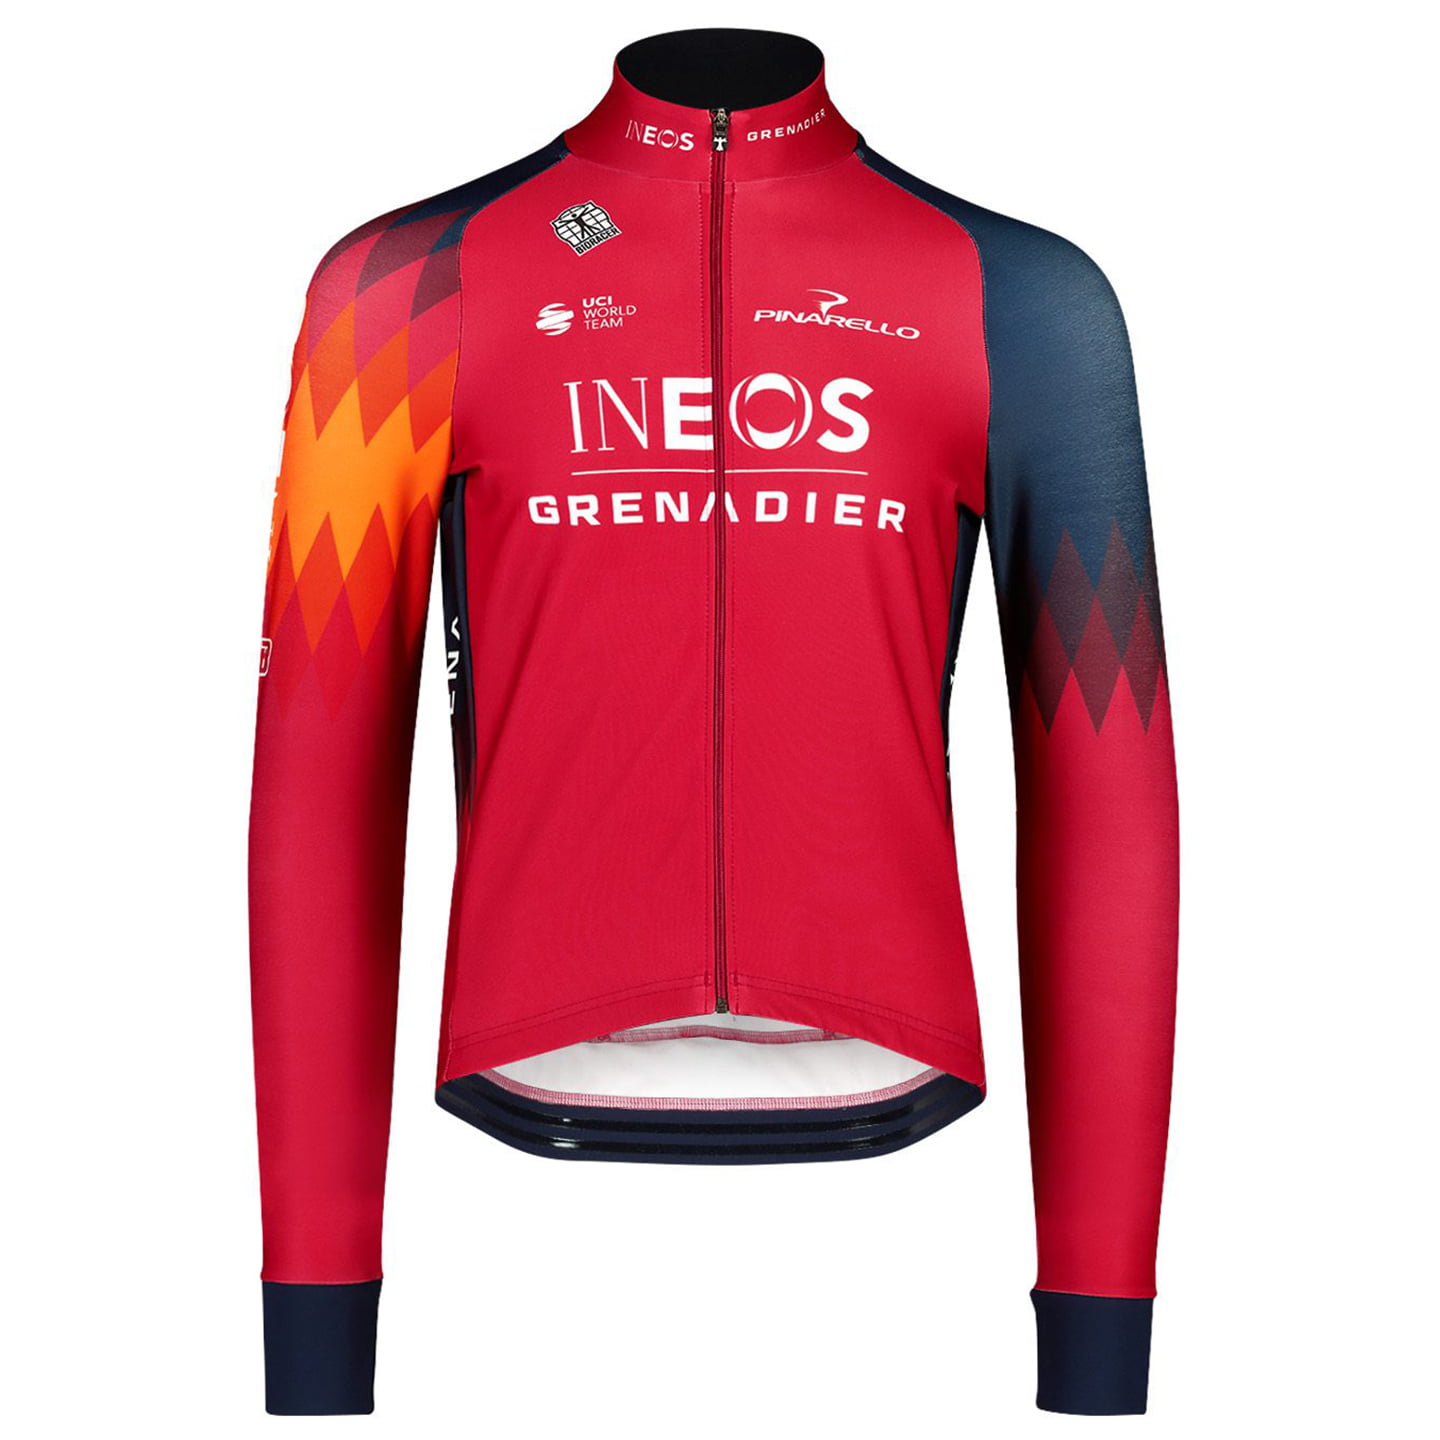 INEOS Grenadiers Jersey Jacket Icon Tempest 2023 Jersey / Jacket, for men, size M, Winter jacket, Cycle clothing